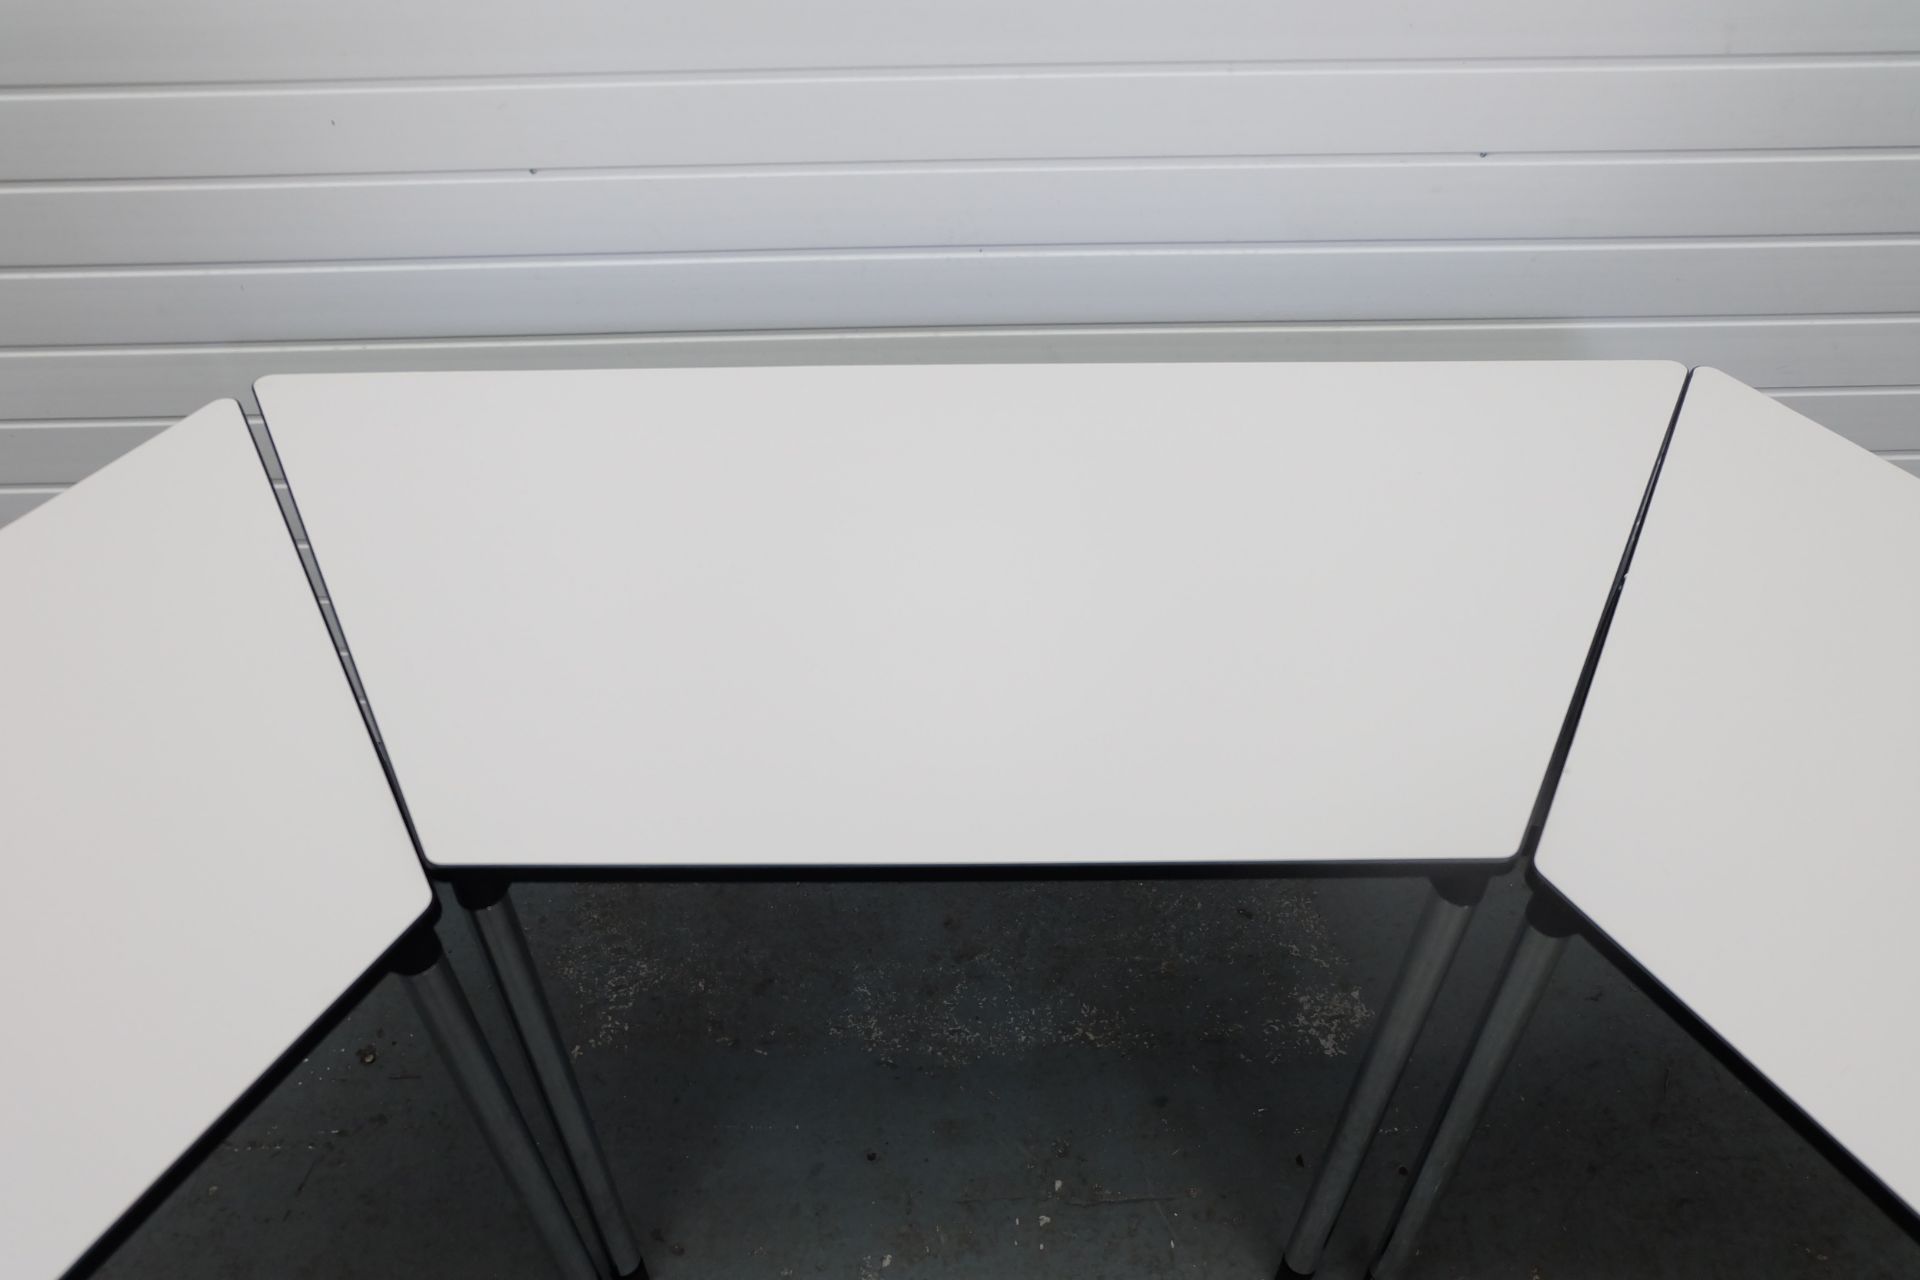 3 x Trapeziod Shape Desks With Metal Legs. Size 1470mm x 650mm x 750mm High. - Image 3 of 4